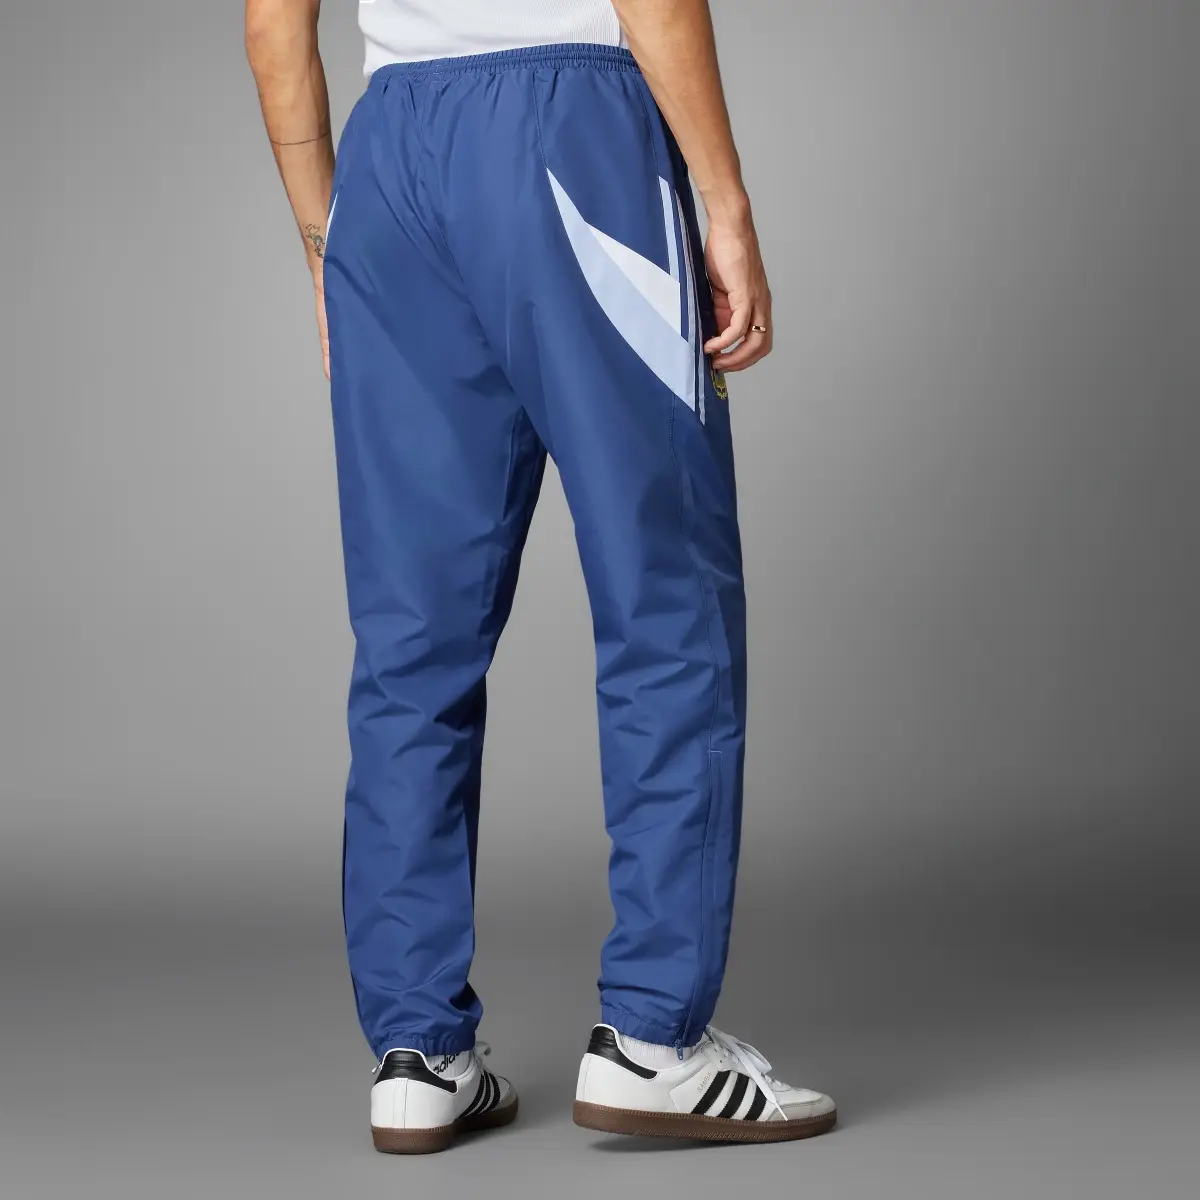 Adidas Argentina 1994 Woven Track Pants. 2